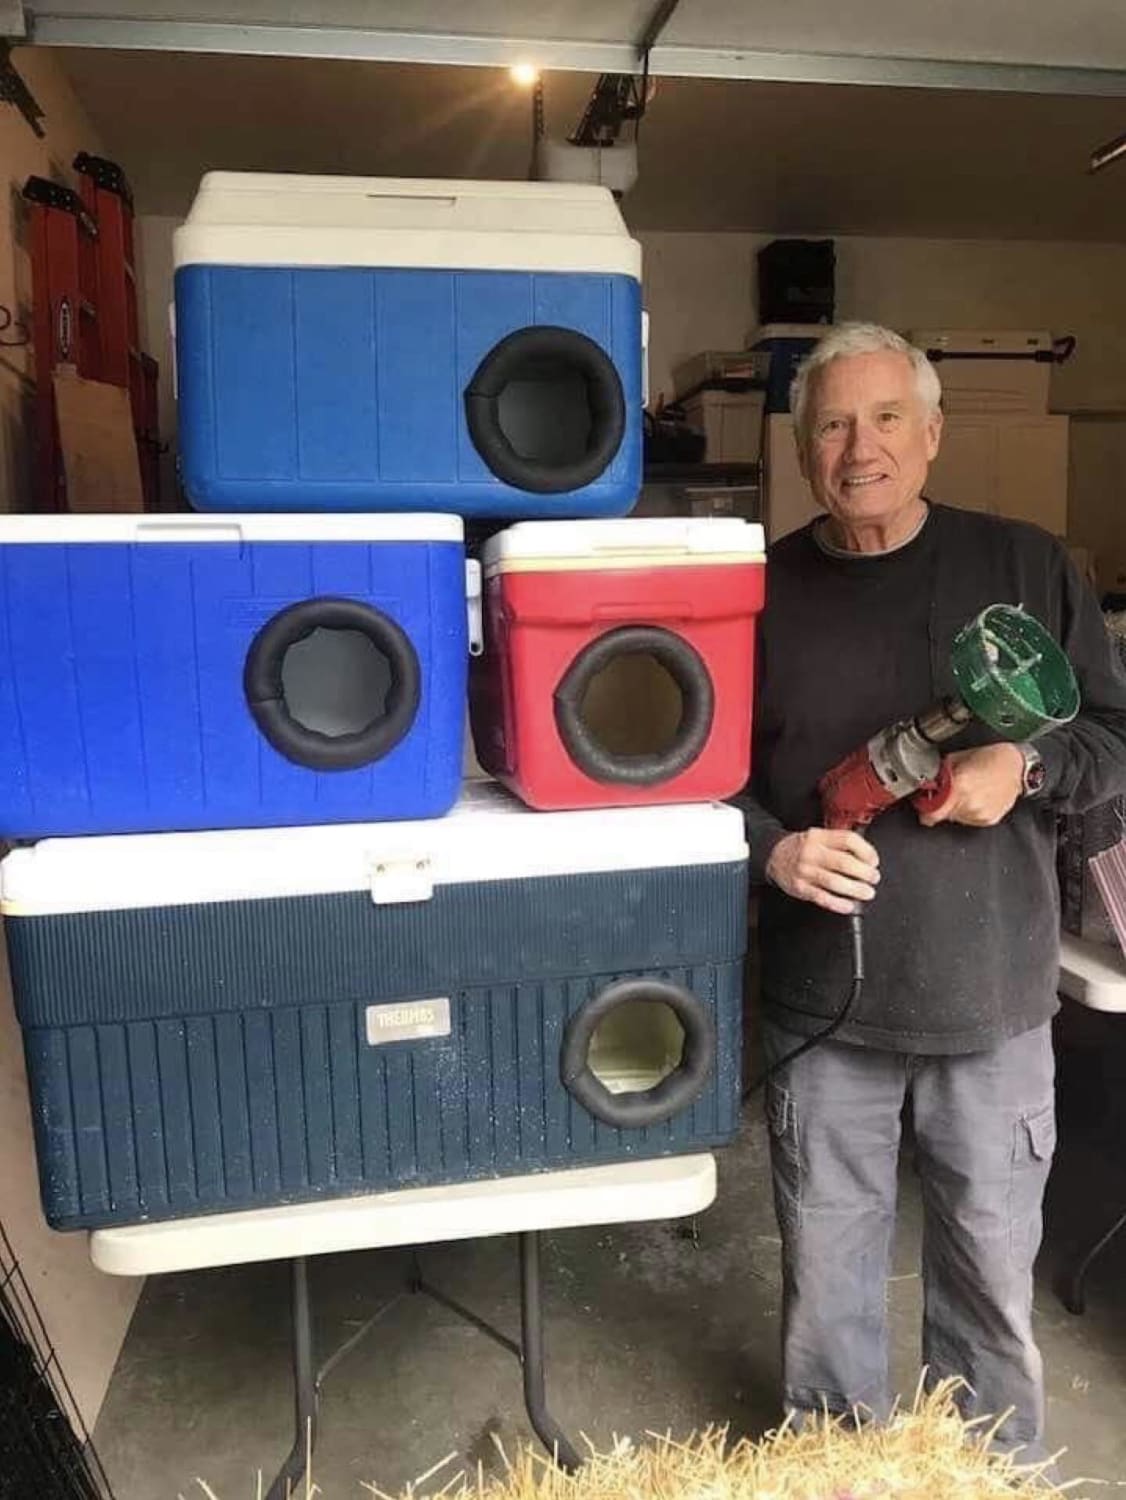 This man is recycling old picnic coolers into shelters for stray cats for winter! How very cool is this?!